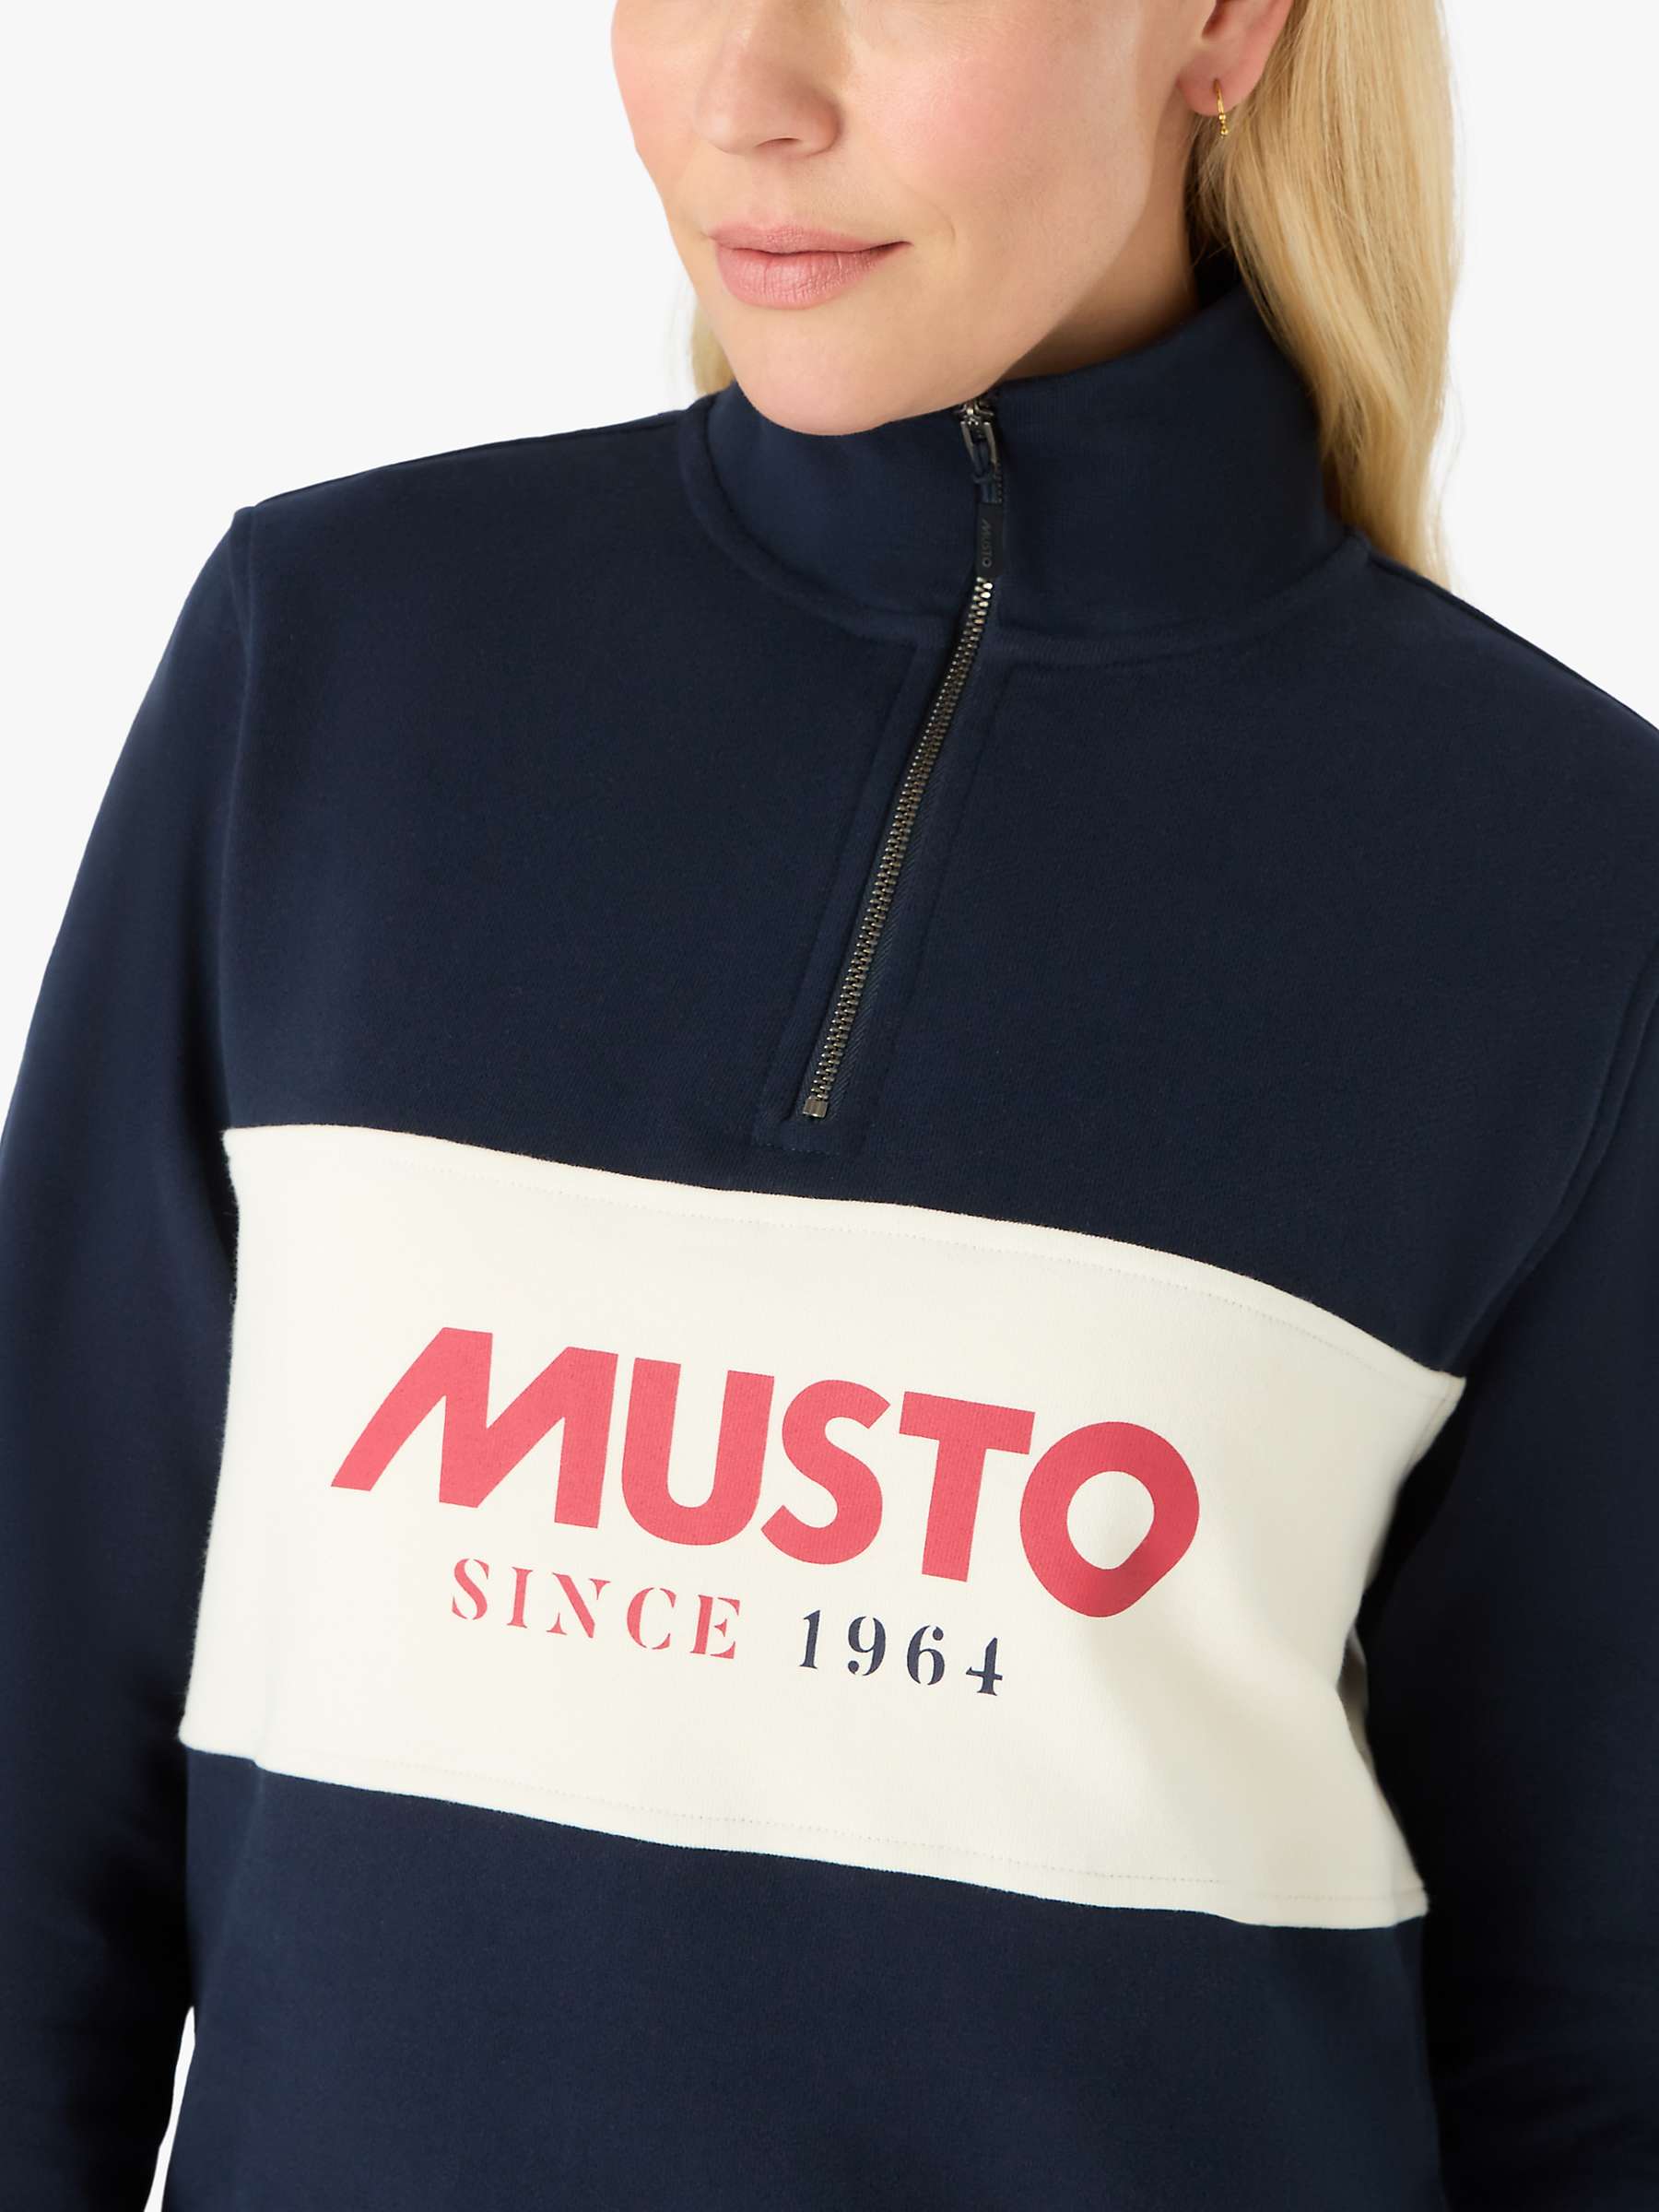 Buy Musto Relaxed Fit 1/4 Zip Jumper, Navy Online at johnlewis.com